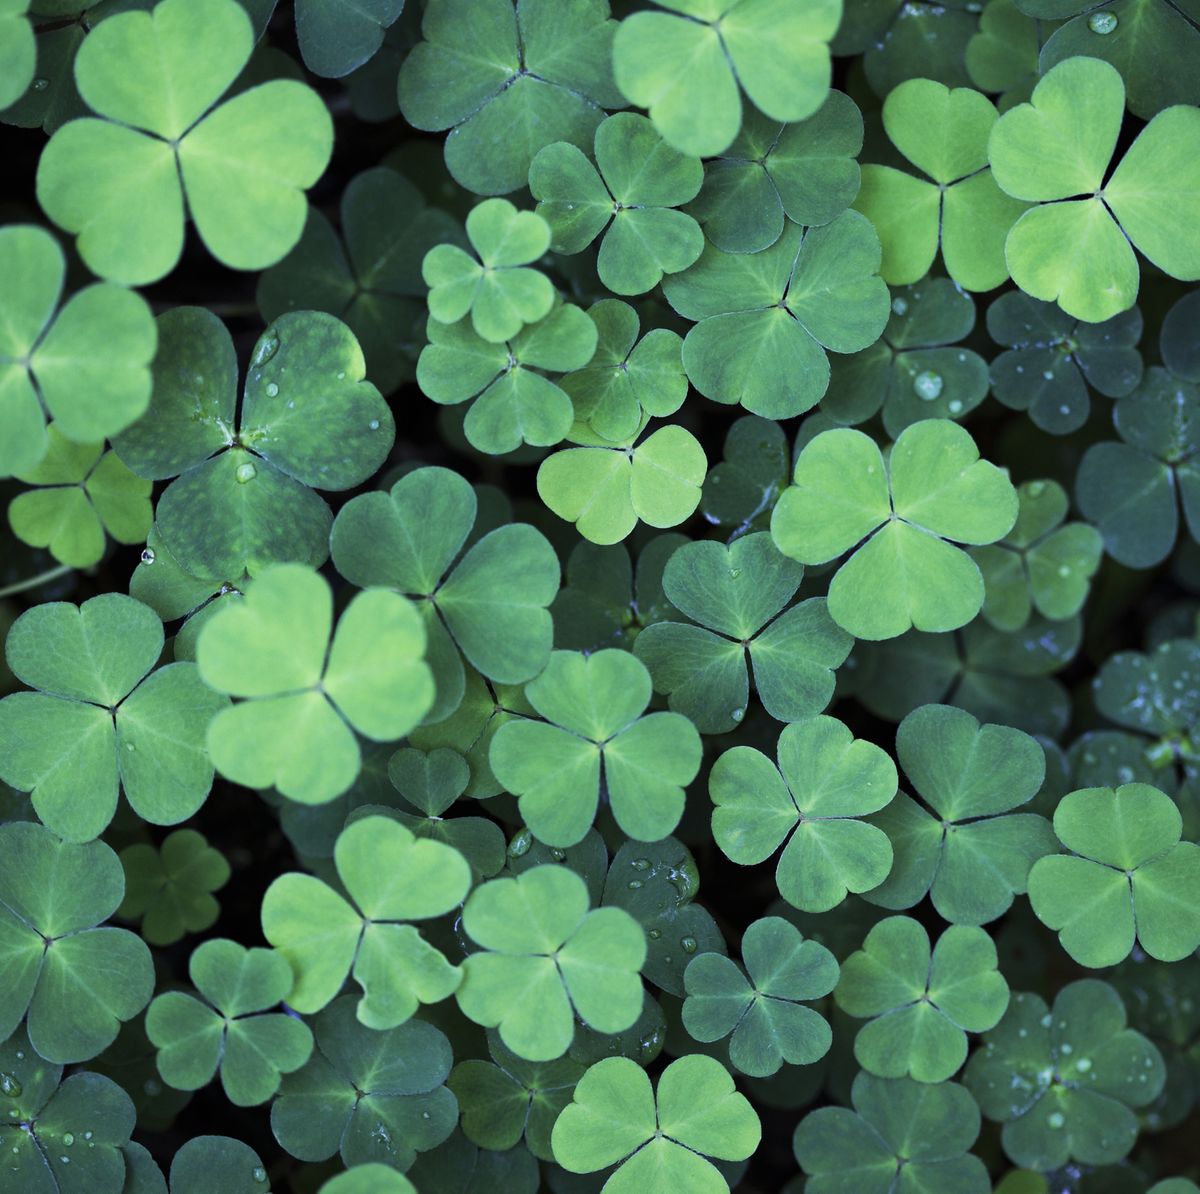 36 Best St. Patrick's Day Quotes - Irish Sayings for Good Luck